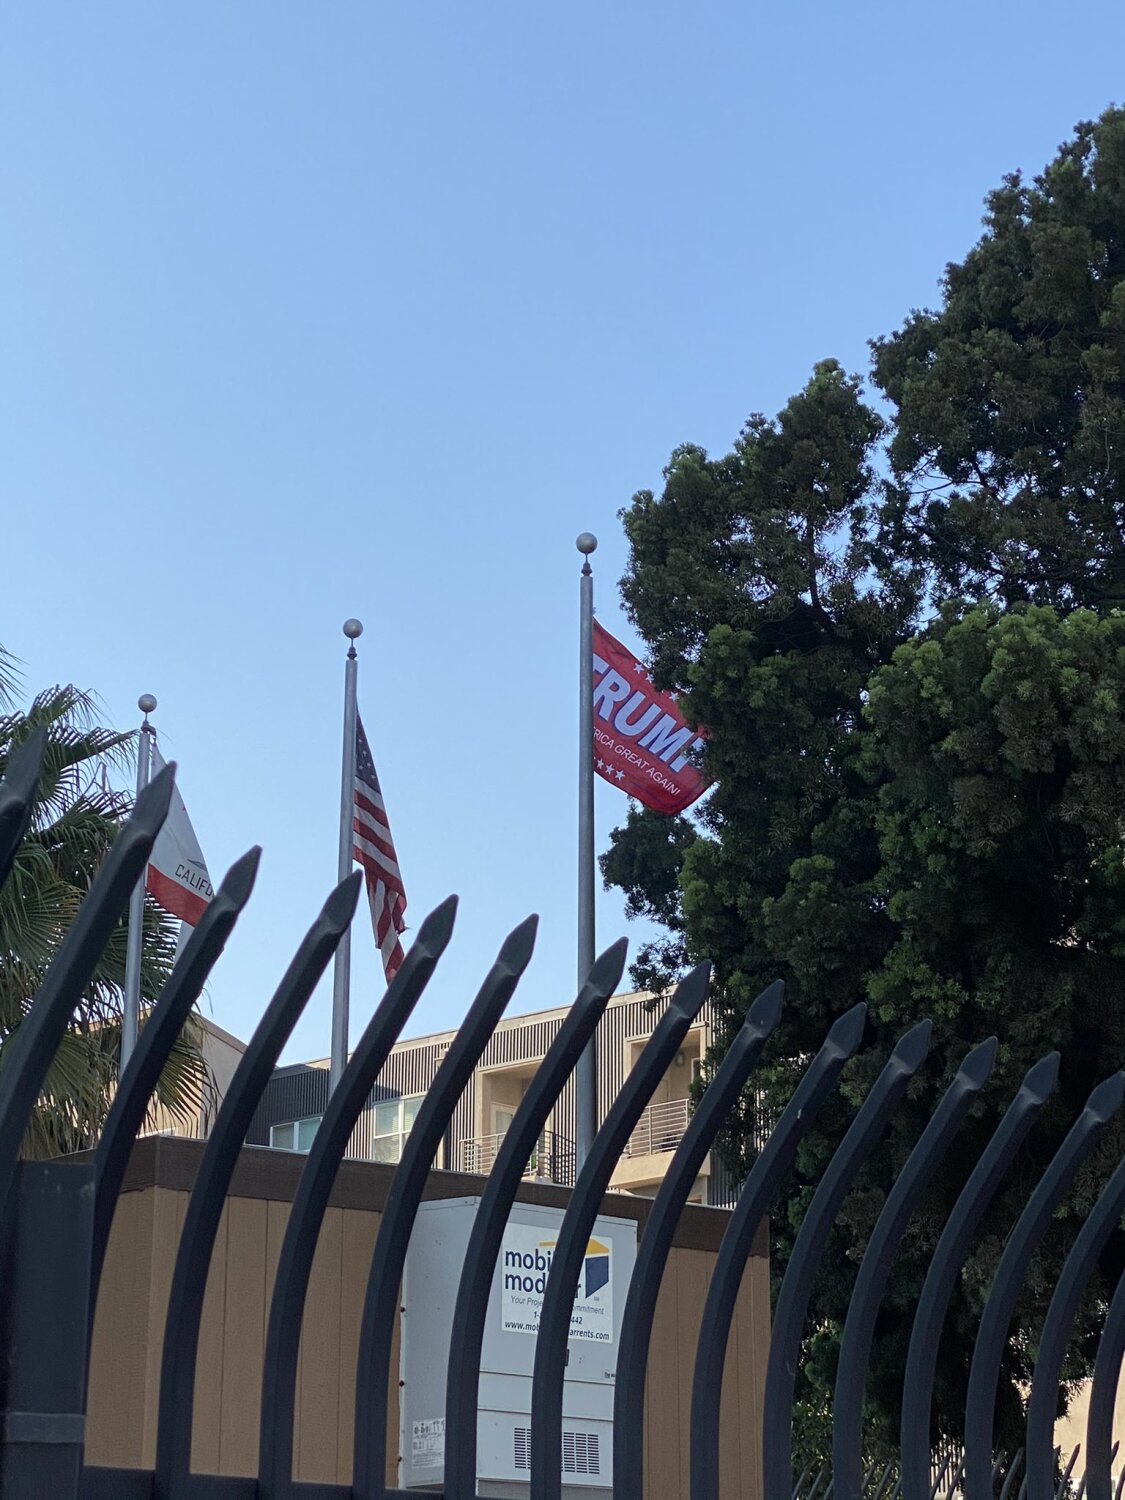 Long Beach city flag replaced with Trump political flag at police headquarters 